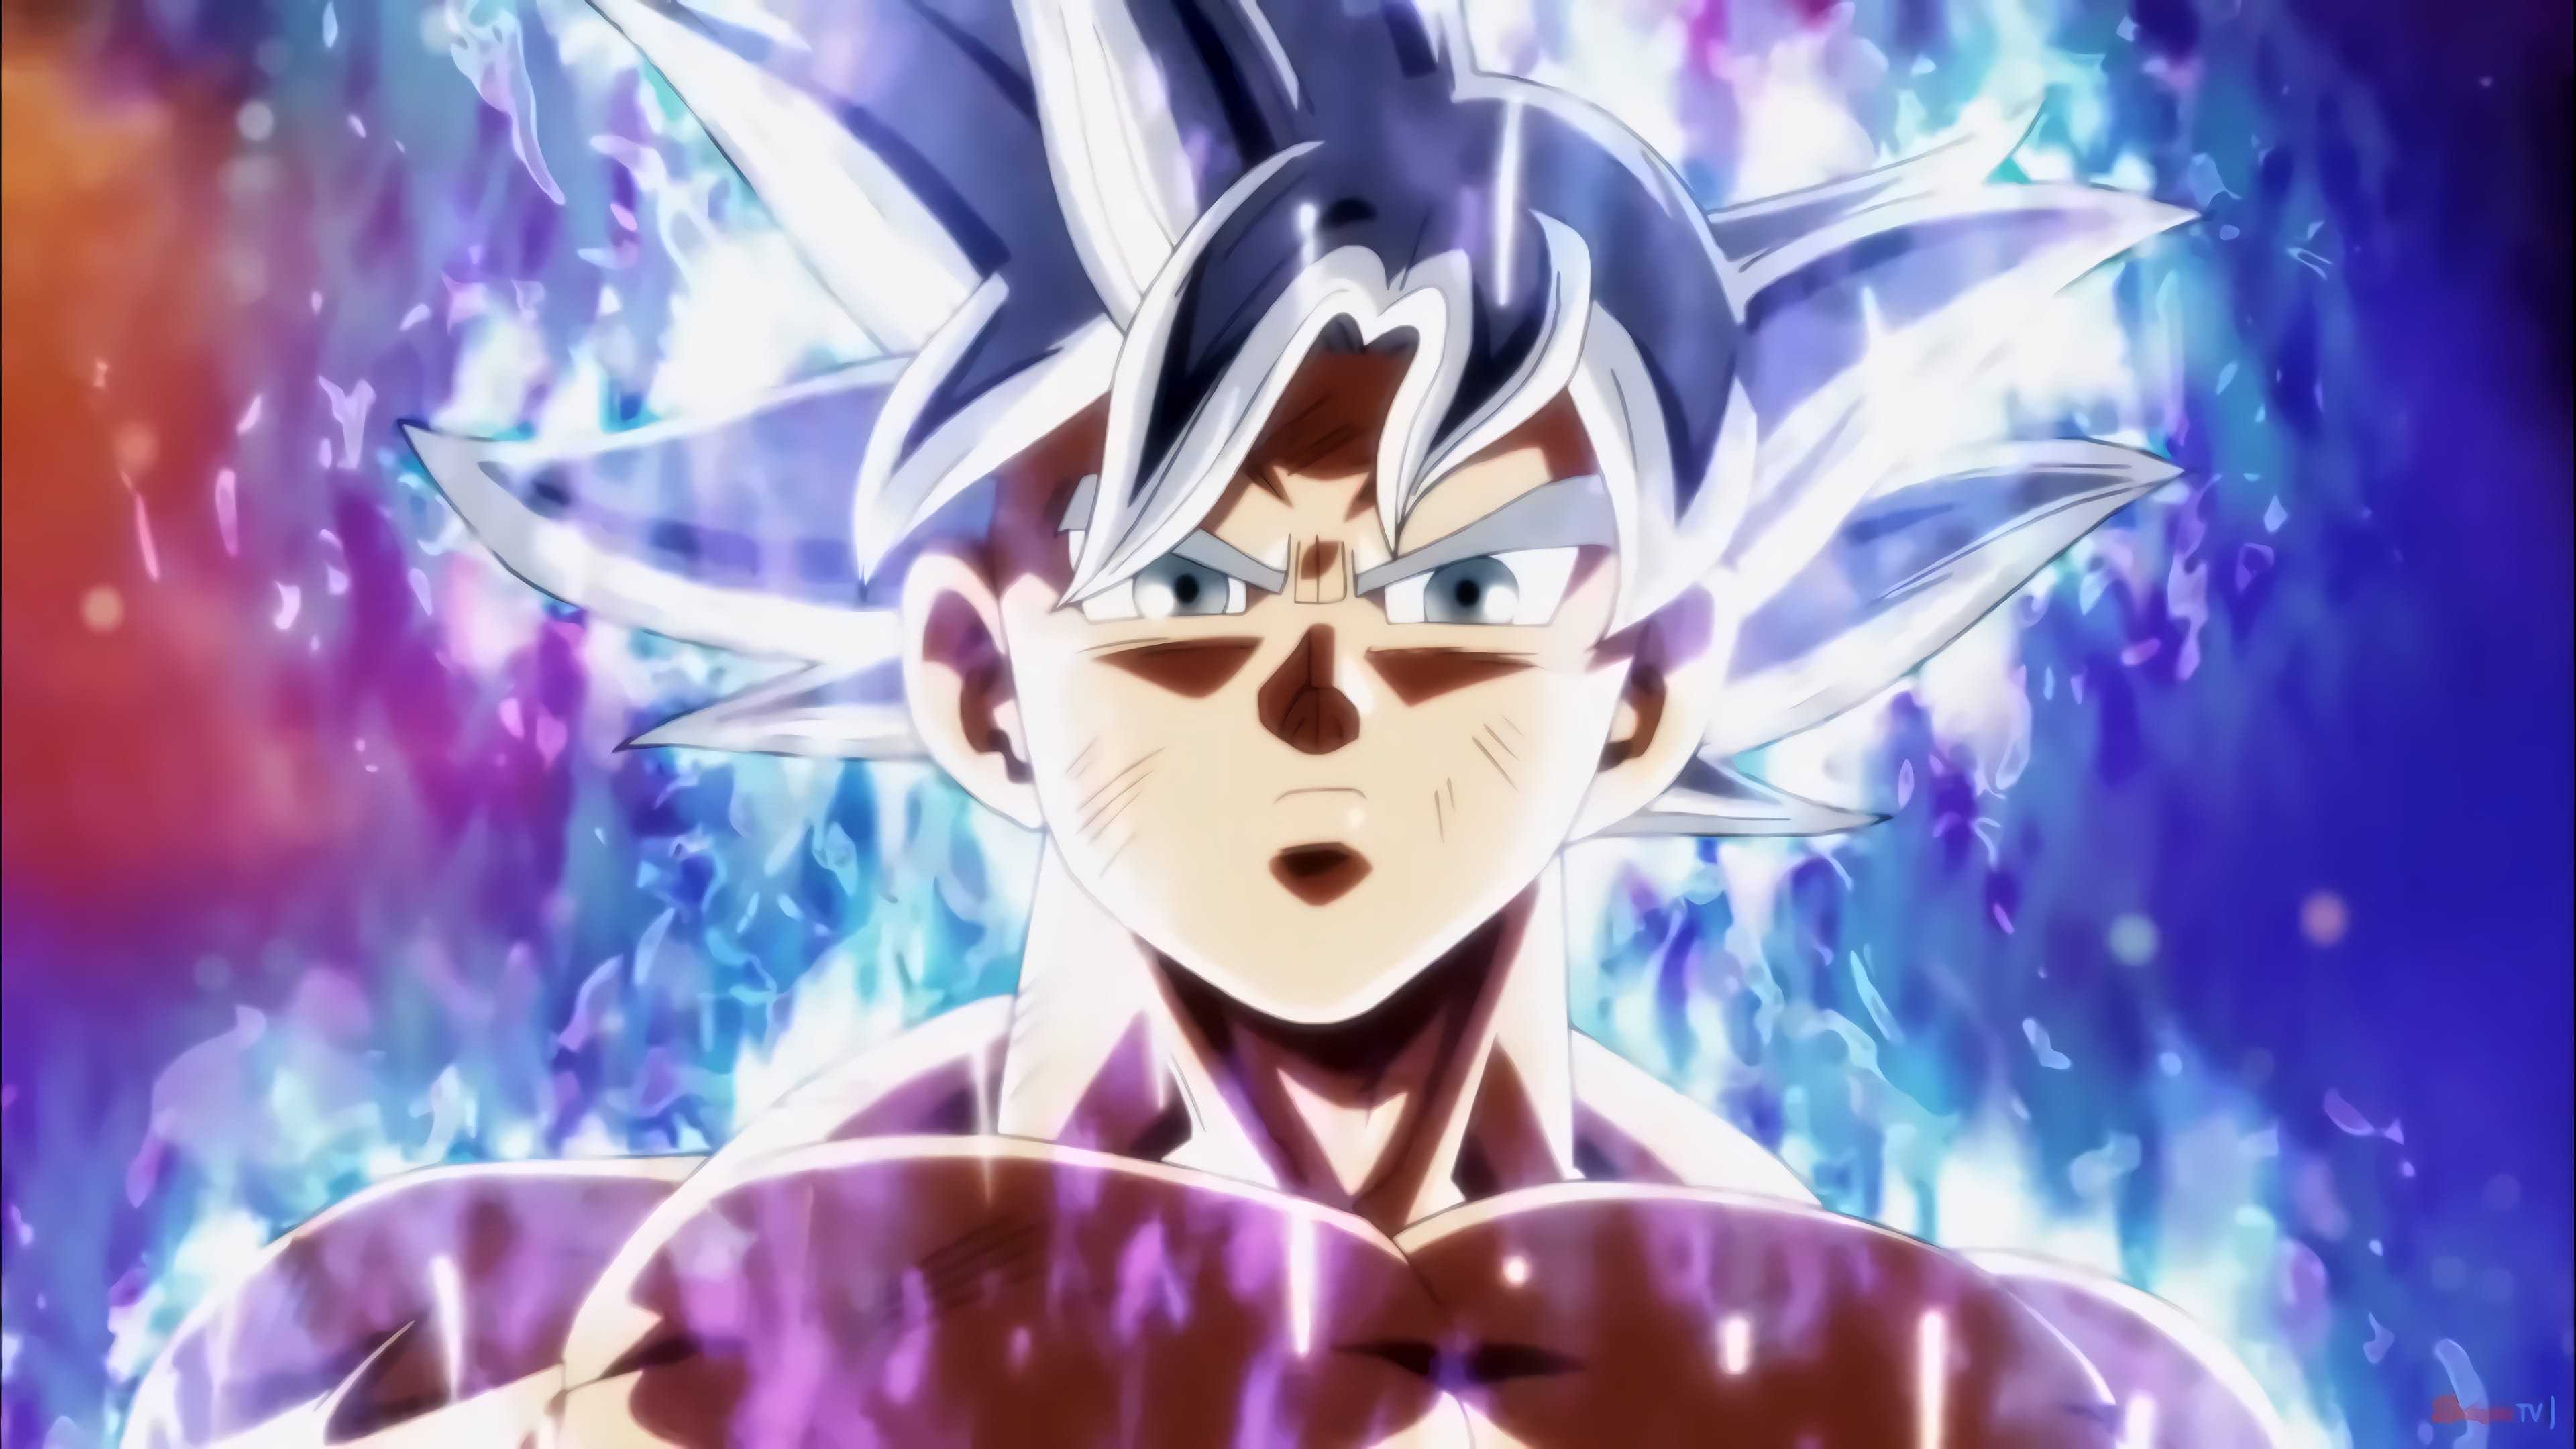 Moving Picture Goku Ultra Instinct Wallpapers